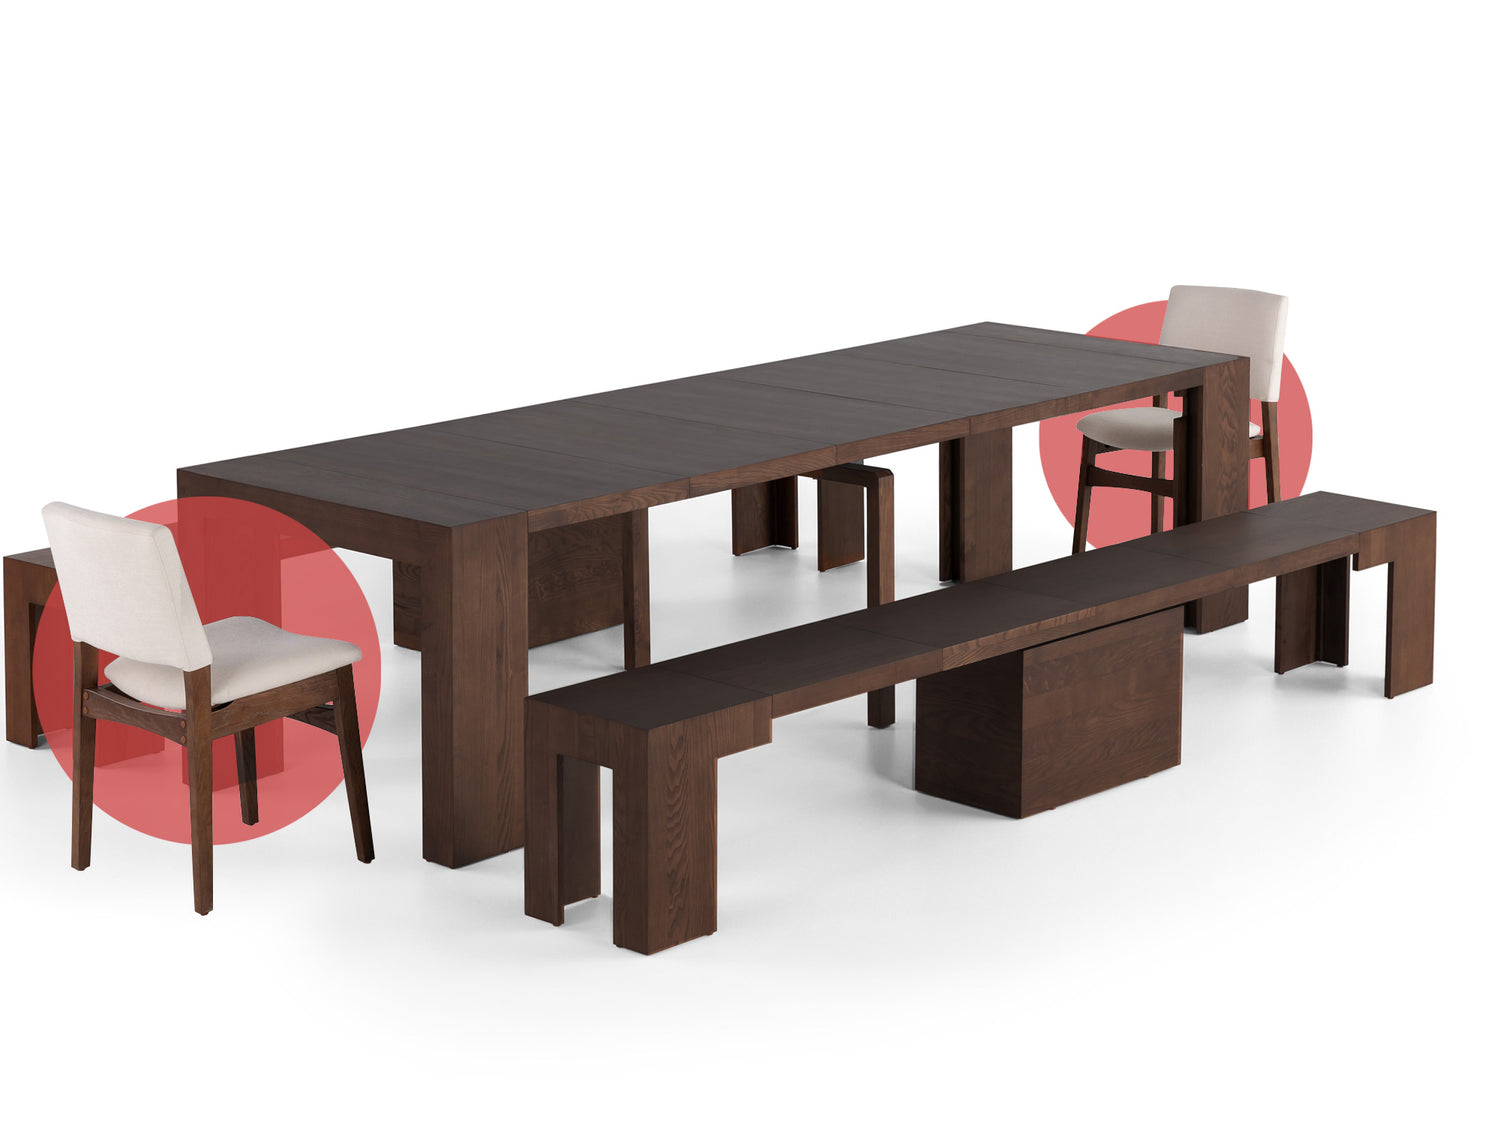 Brazilian Sequoia::Gallery::Brazilian Sequoia Transformer Table Shown with Removable Panels